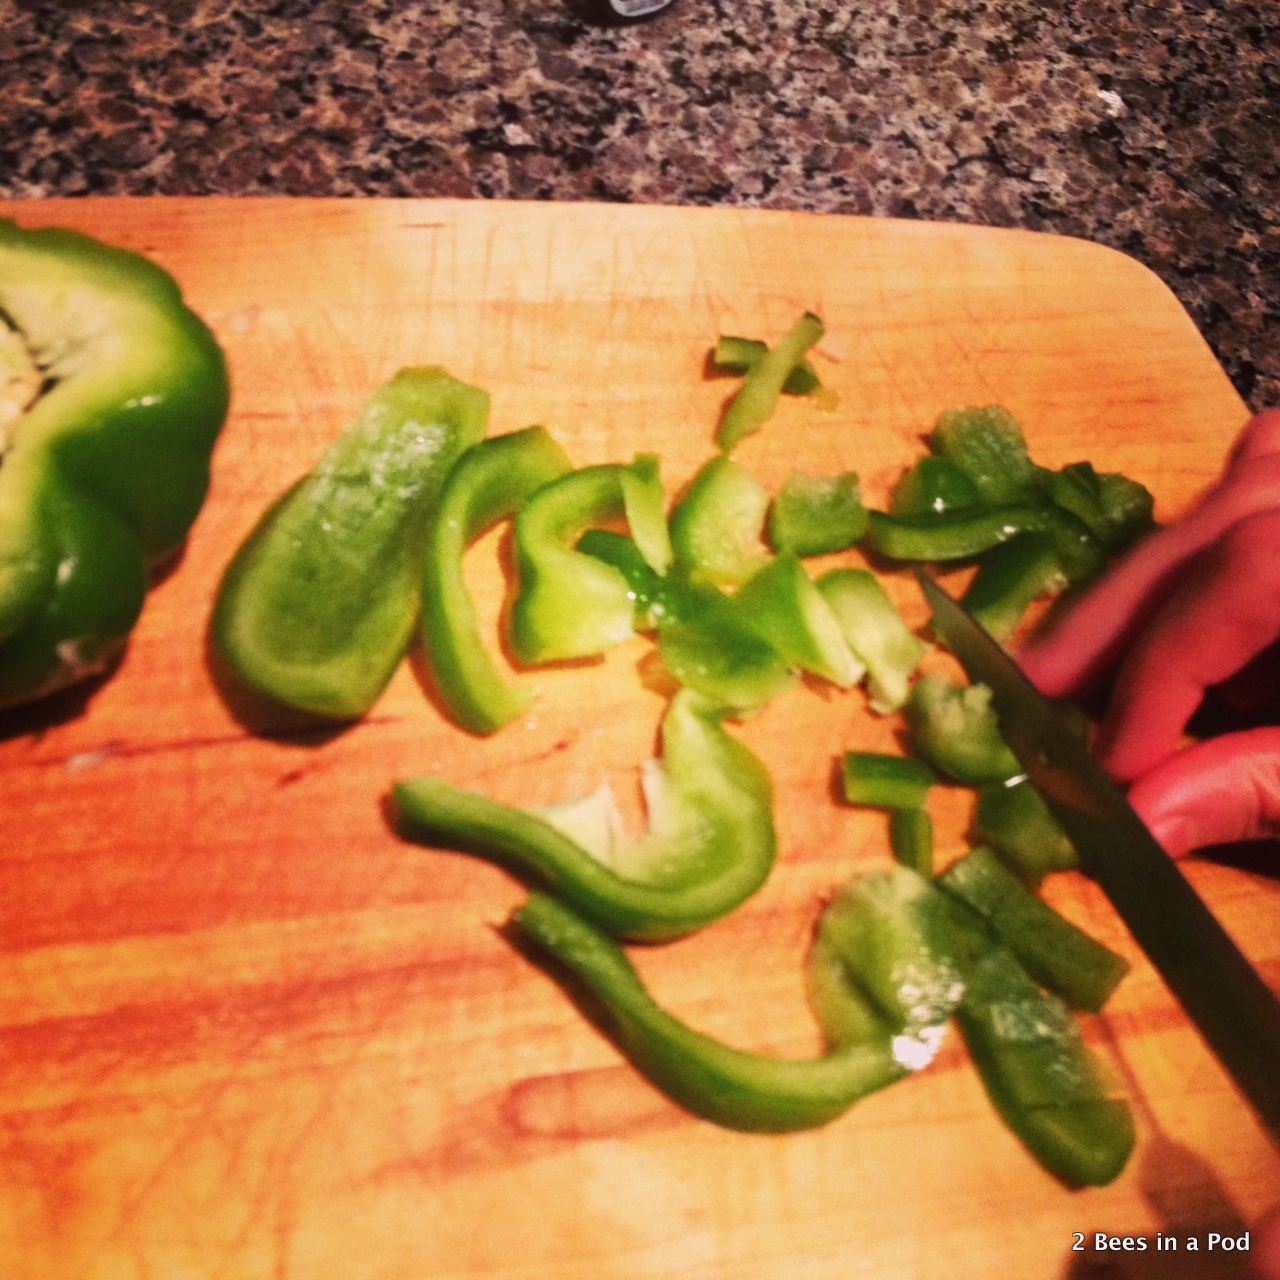 1-Chopping green peppers for homemade chili